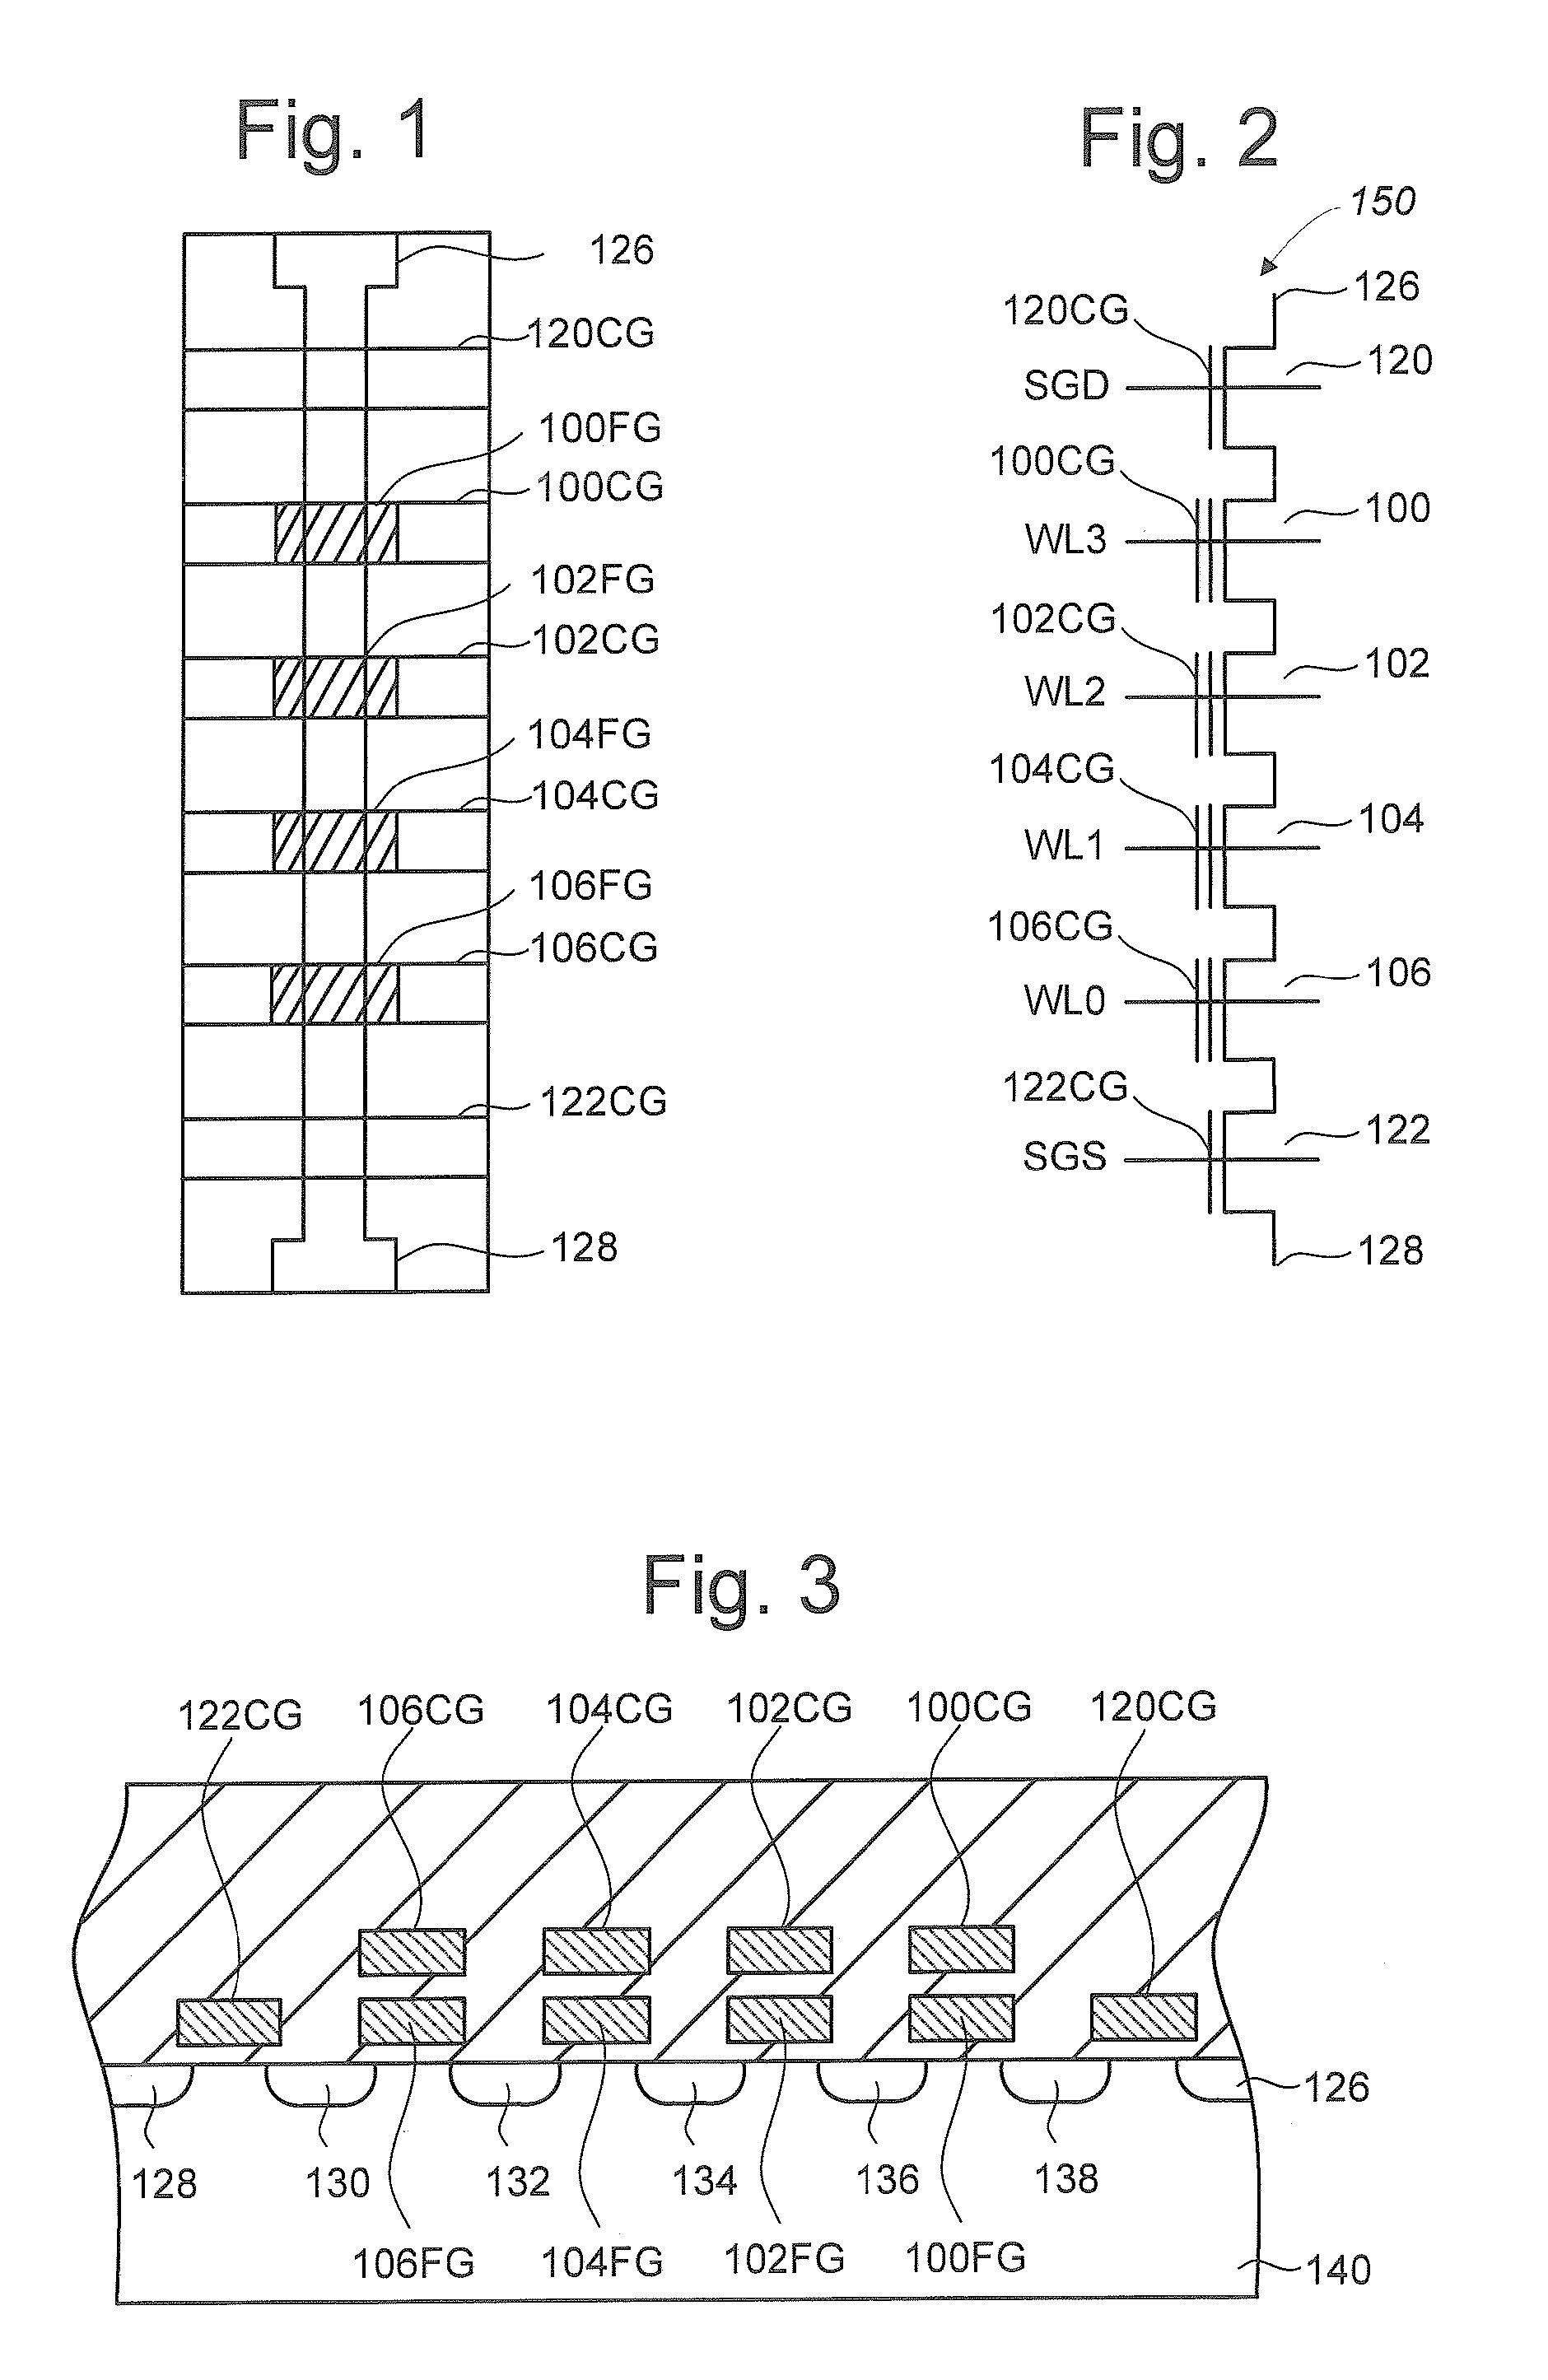 System that compensates for coupling based on sensing a neighbor using coupling